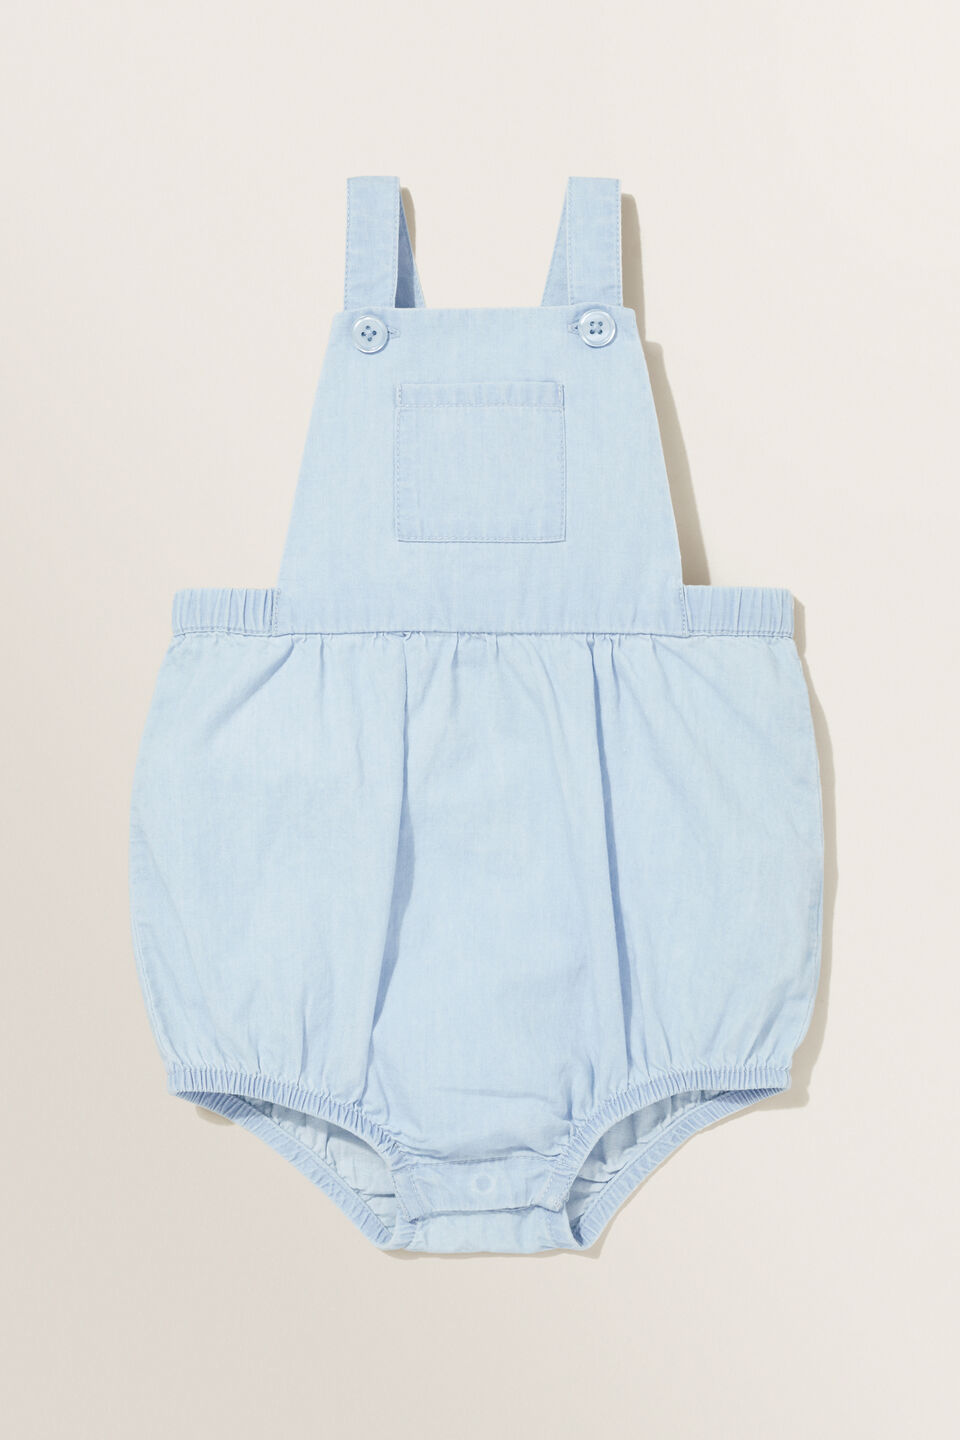 Chambray Overall Romper  Chambray